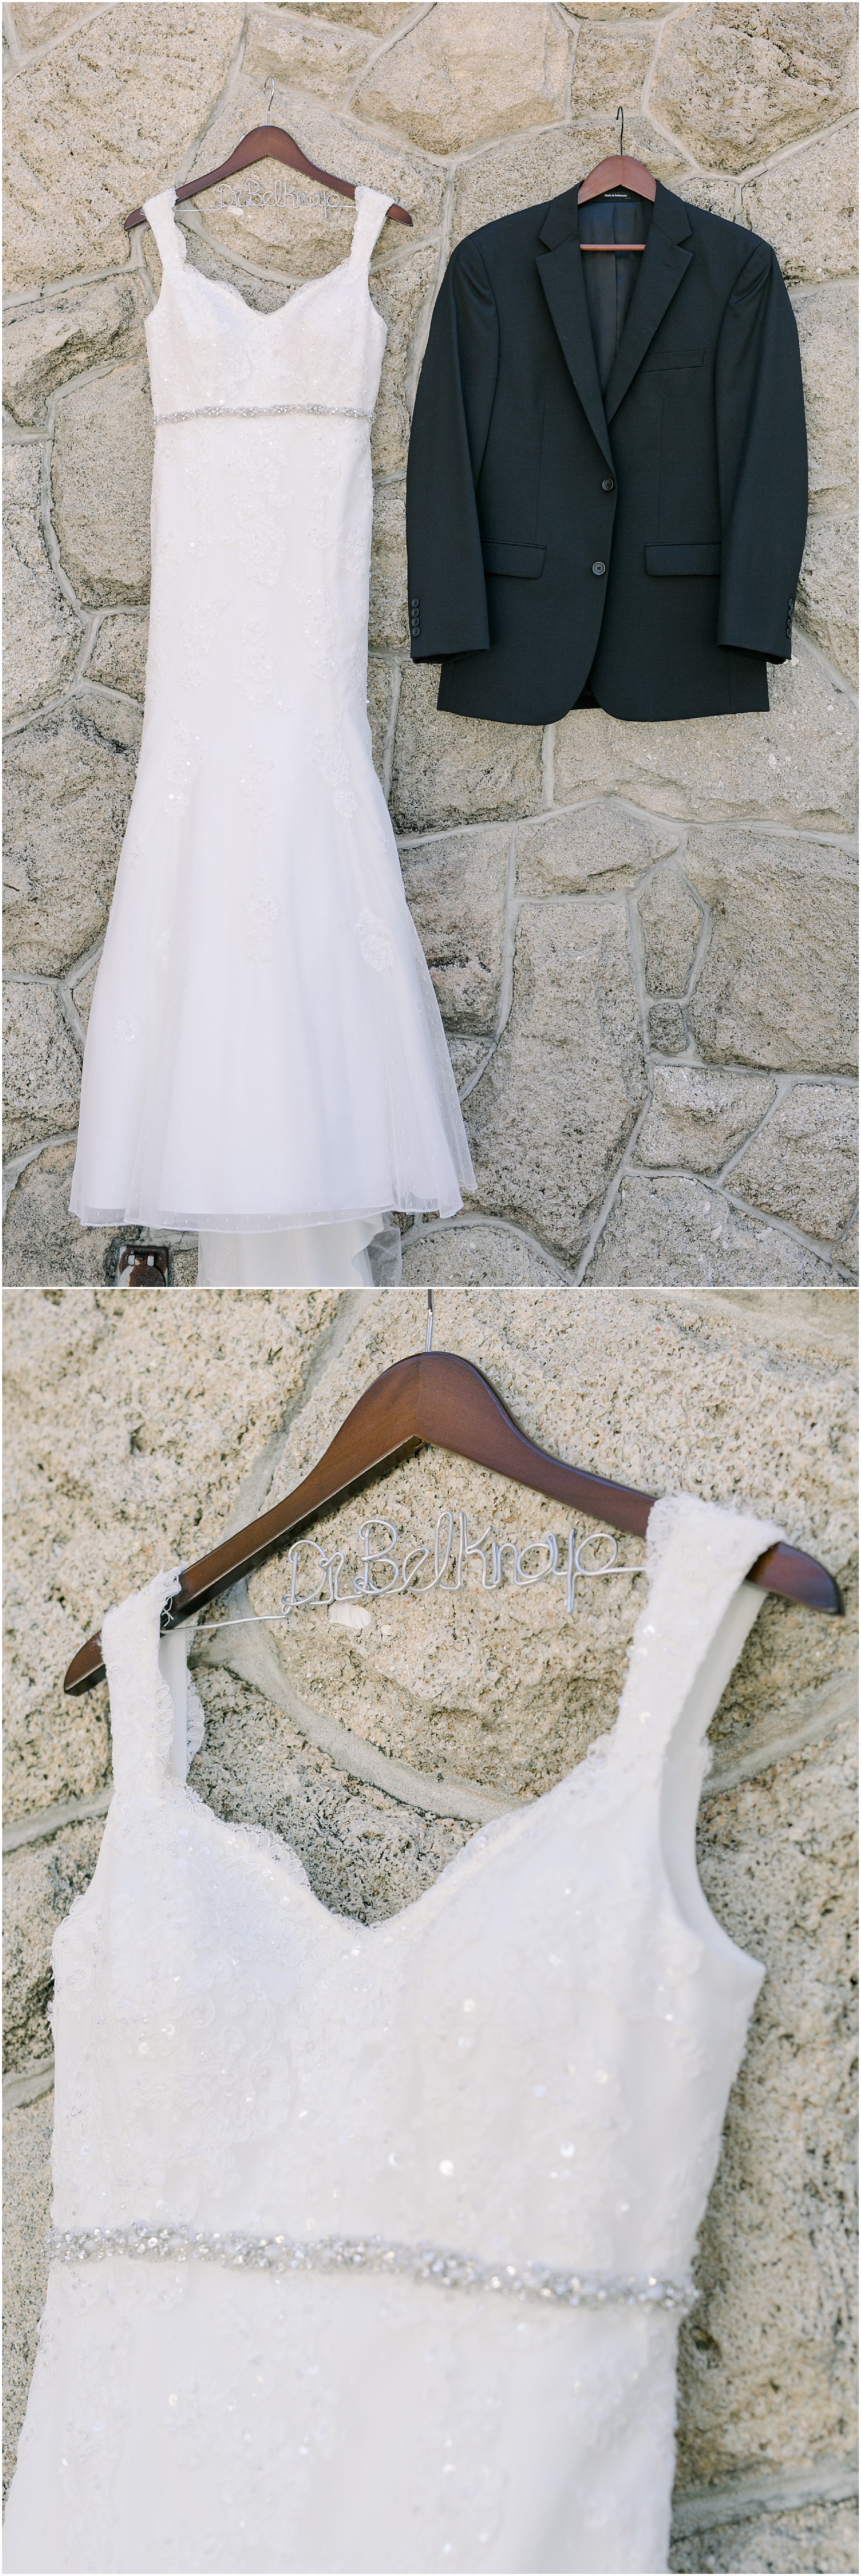 Wedding dress and suit hanging on a cobblestone wall.